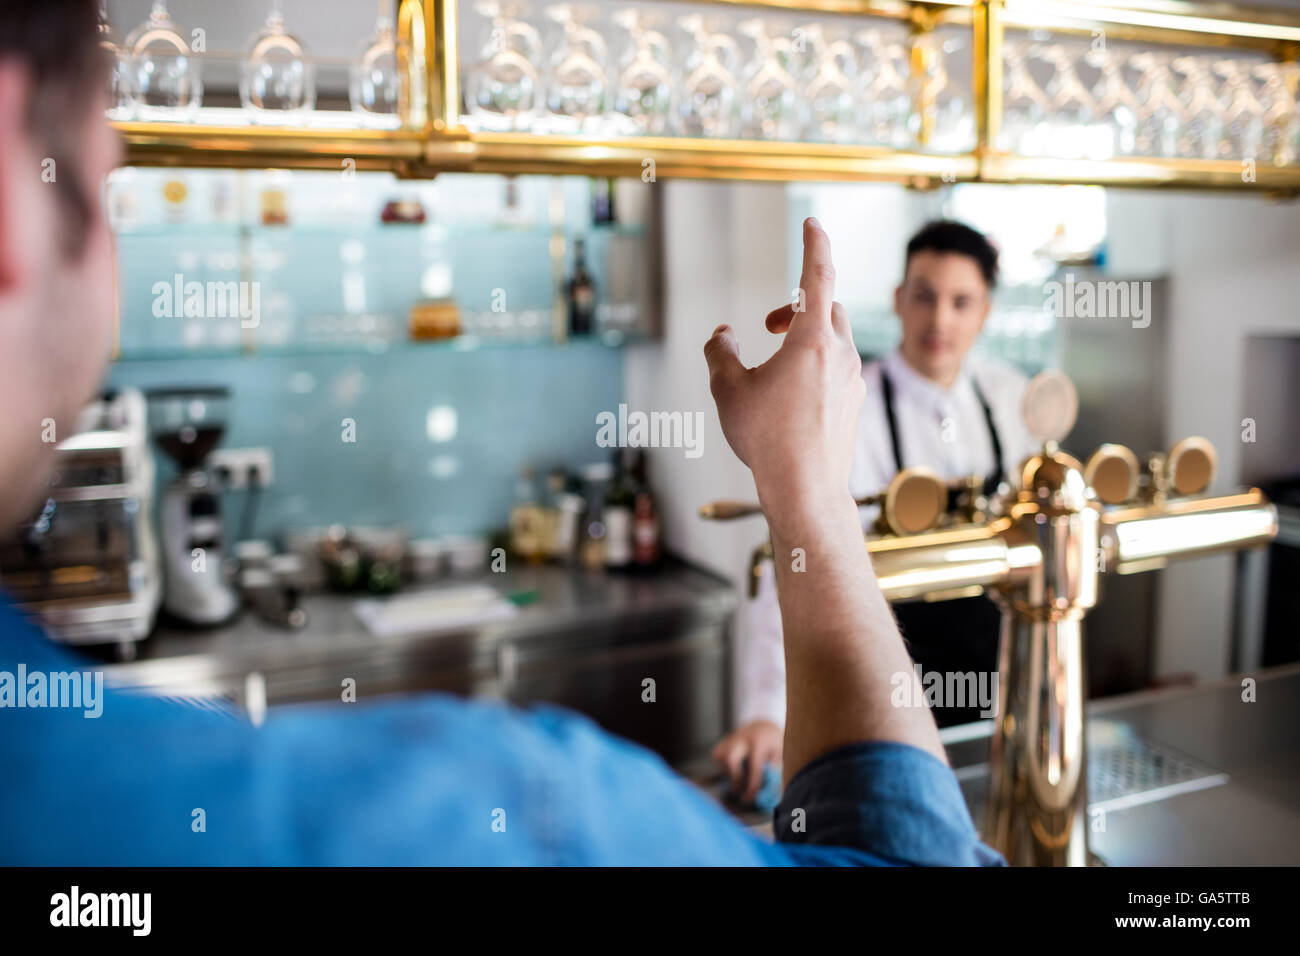 Man gesturing while talking with bartender Stock Photo